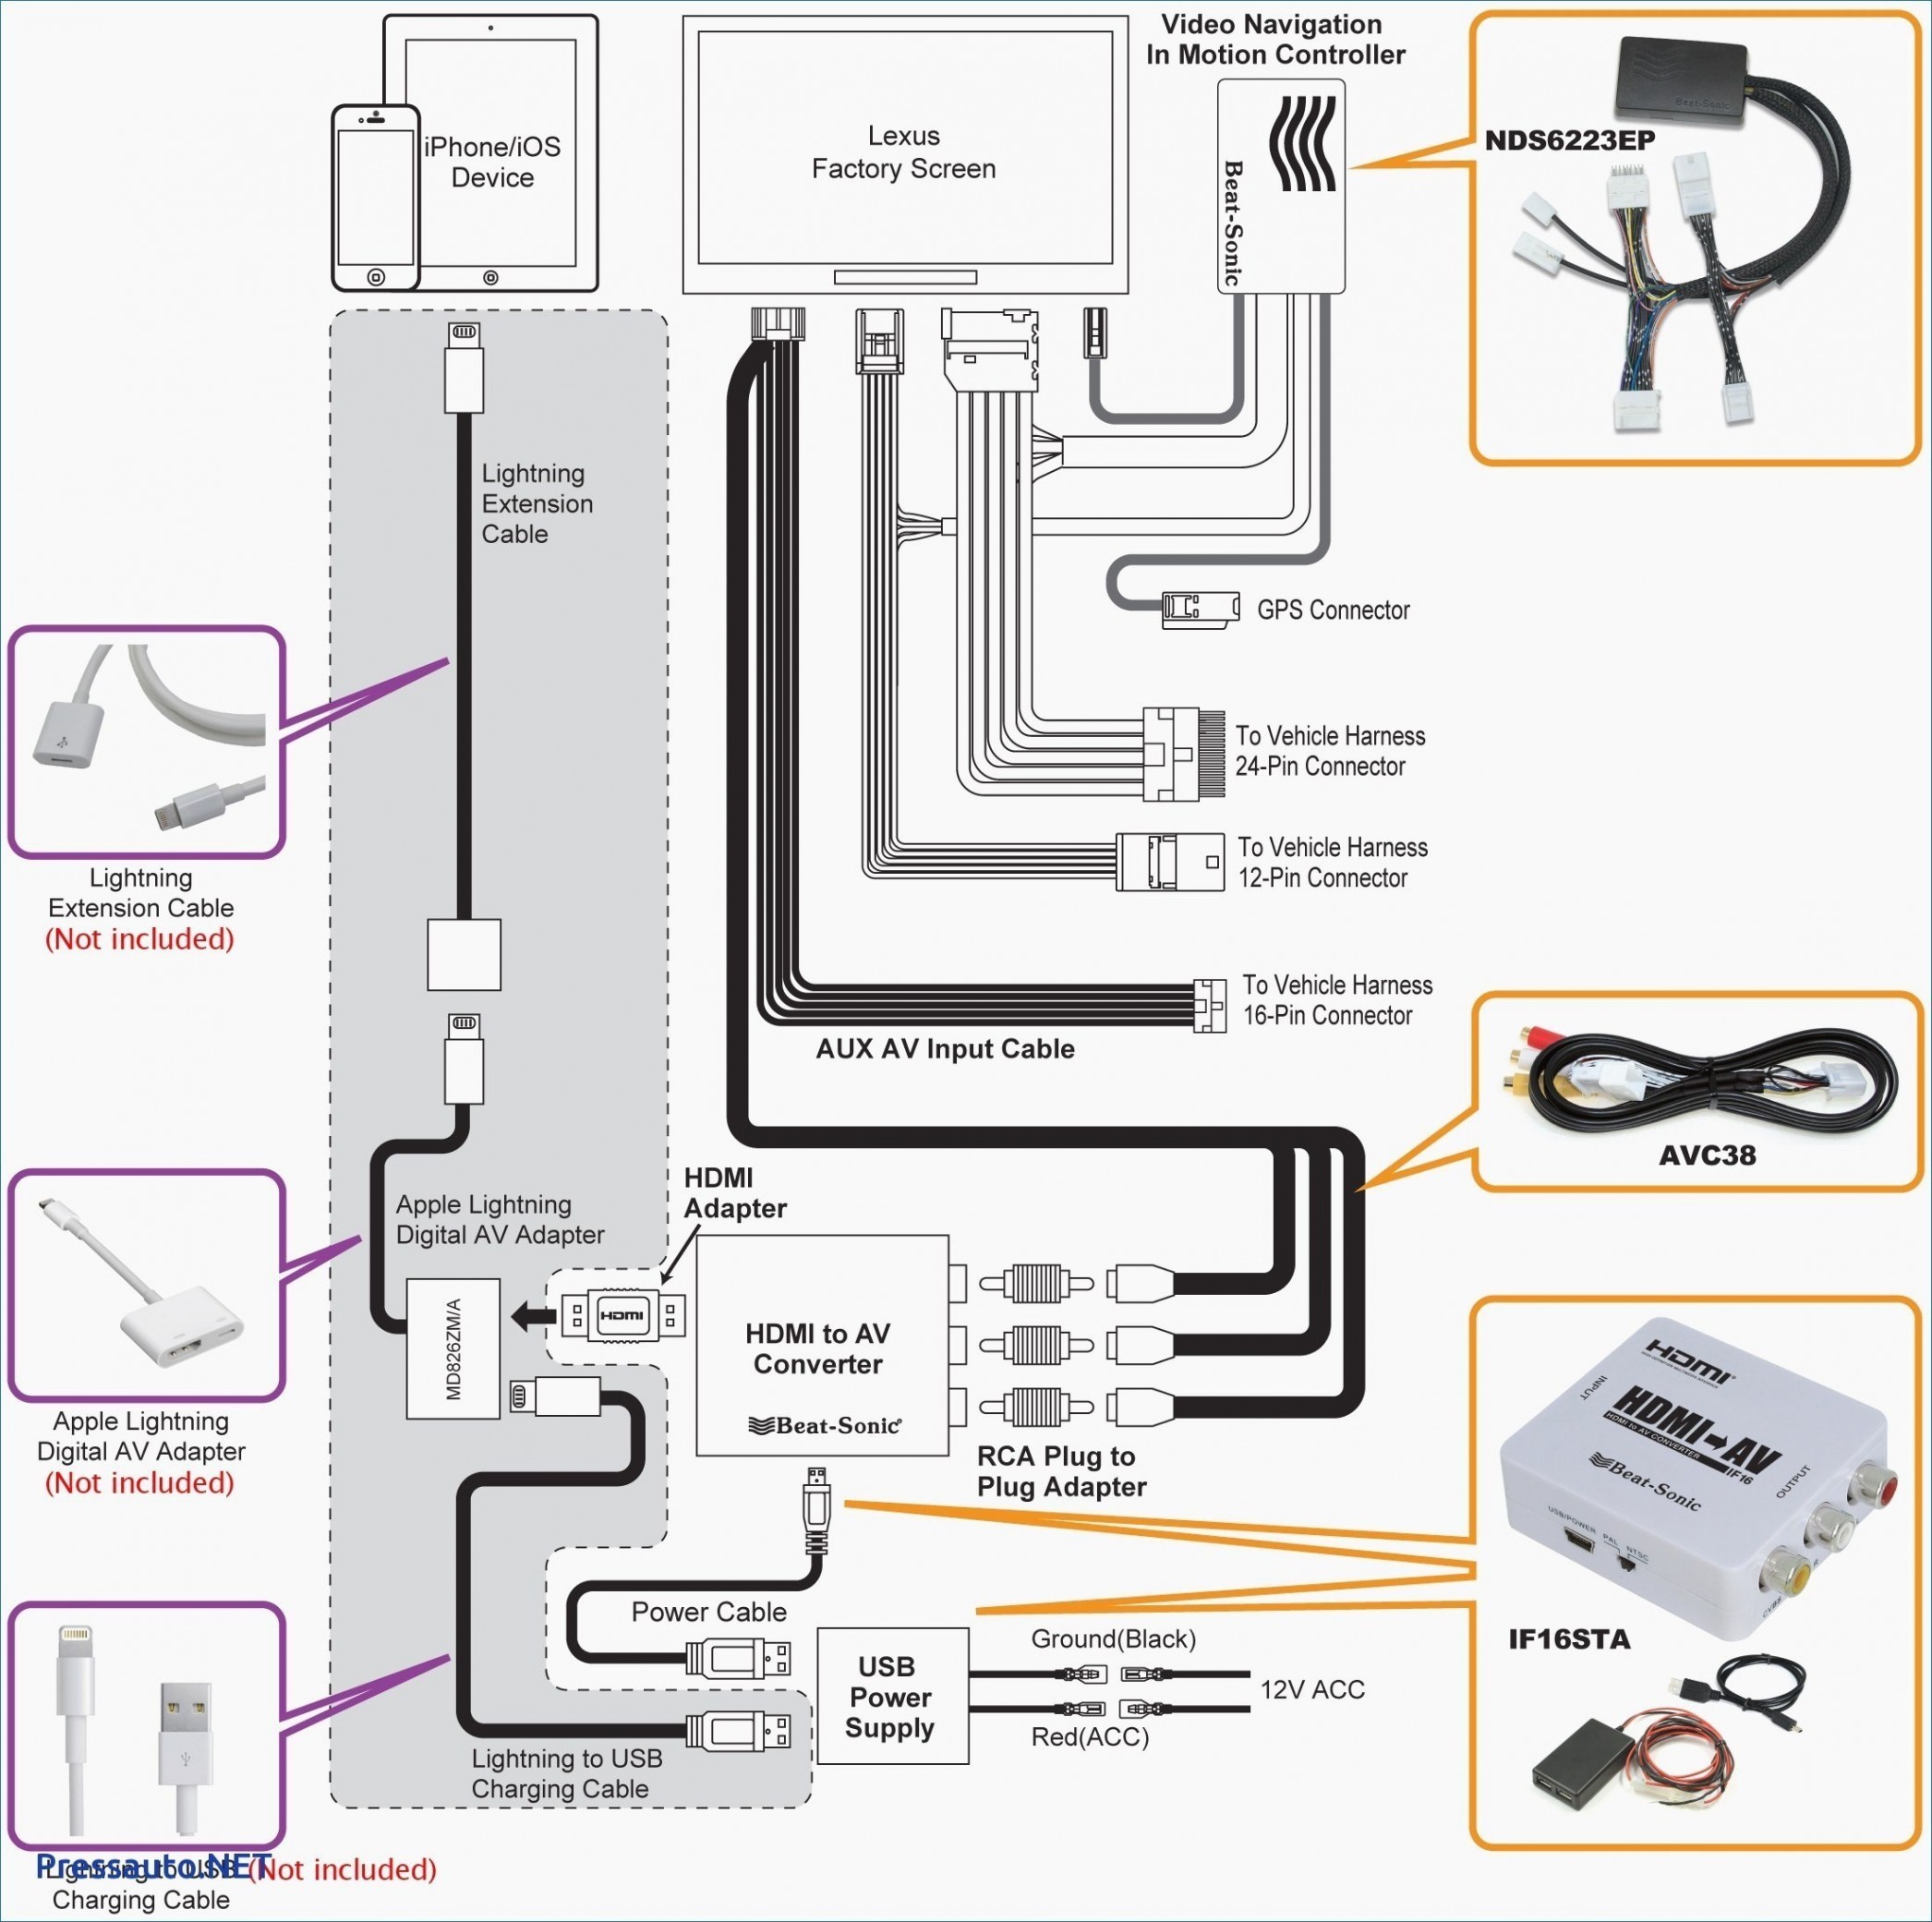 Micro Usb Cable Wiring Diagram Inspirationa Micro Usb Wiring Diagram – Wiring Diagram Apple Usb Cable